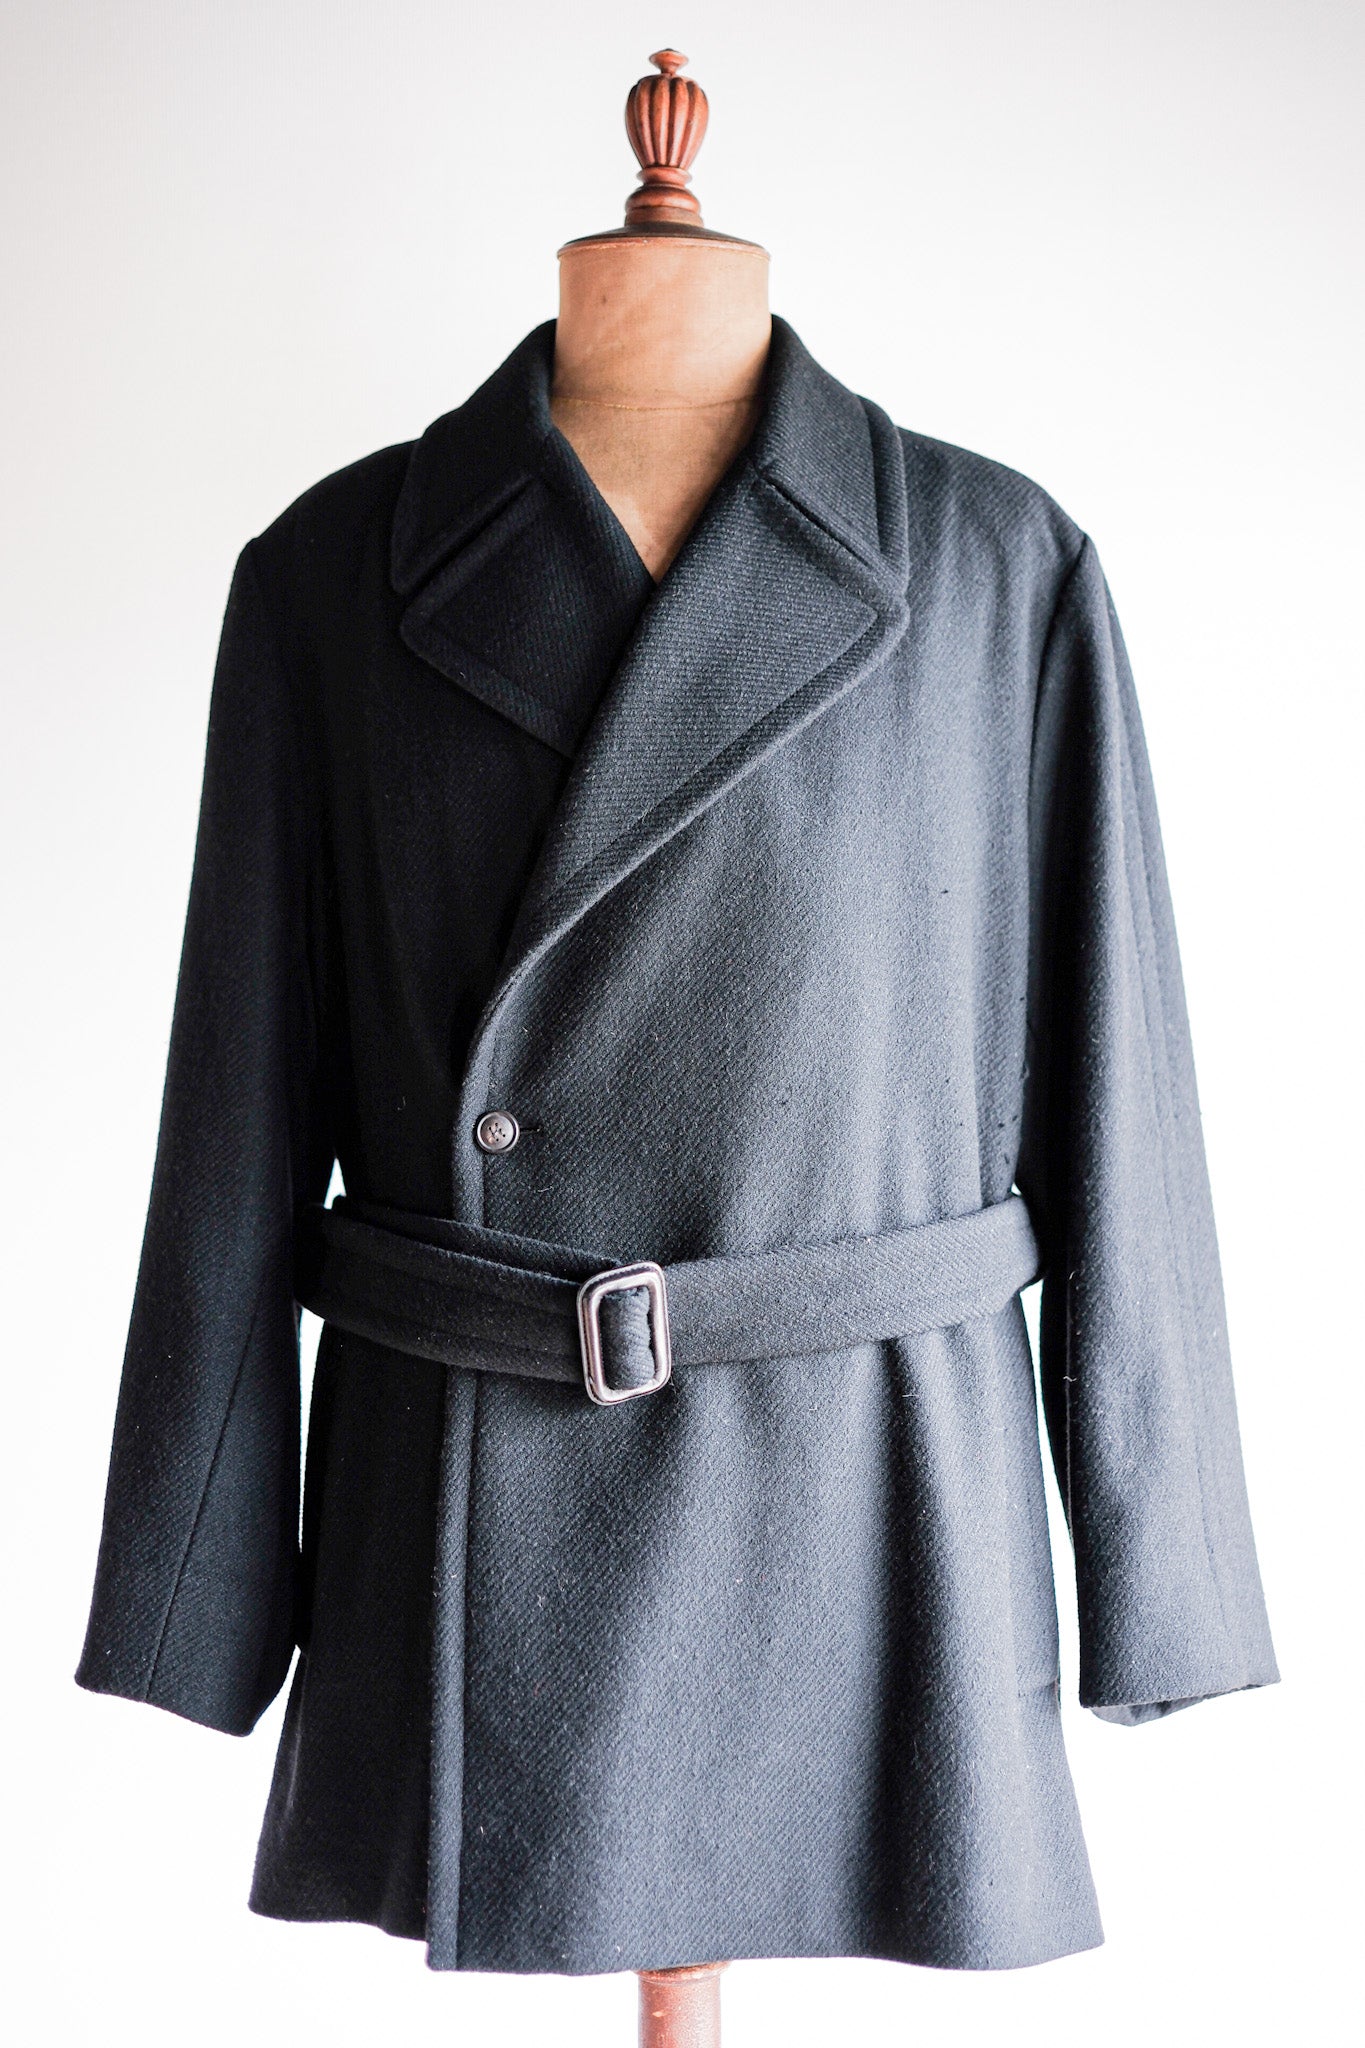 00's】Old Hermès Paris Cashmere Mix Wool Belted Coat by Martin Margie